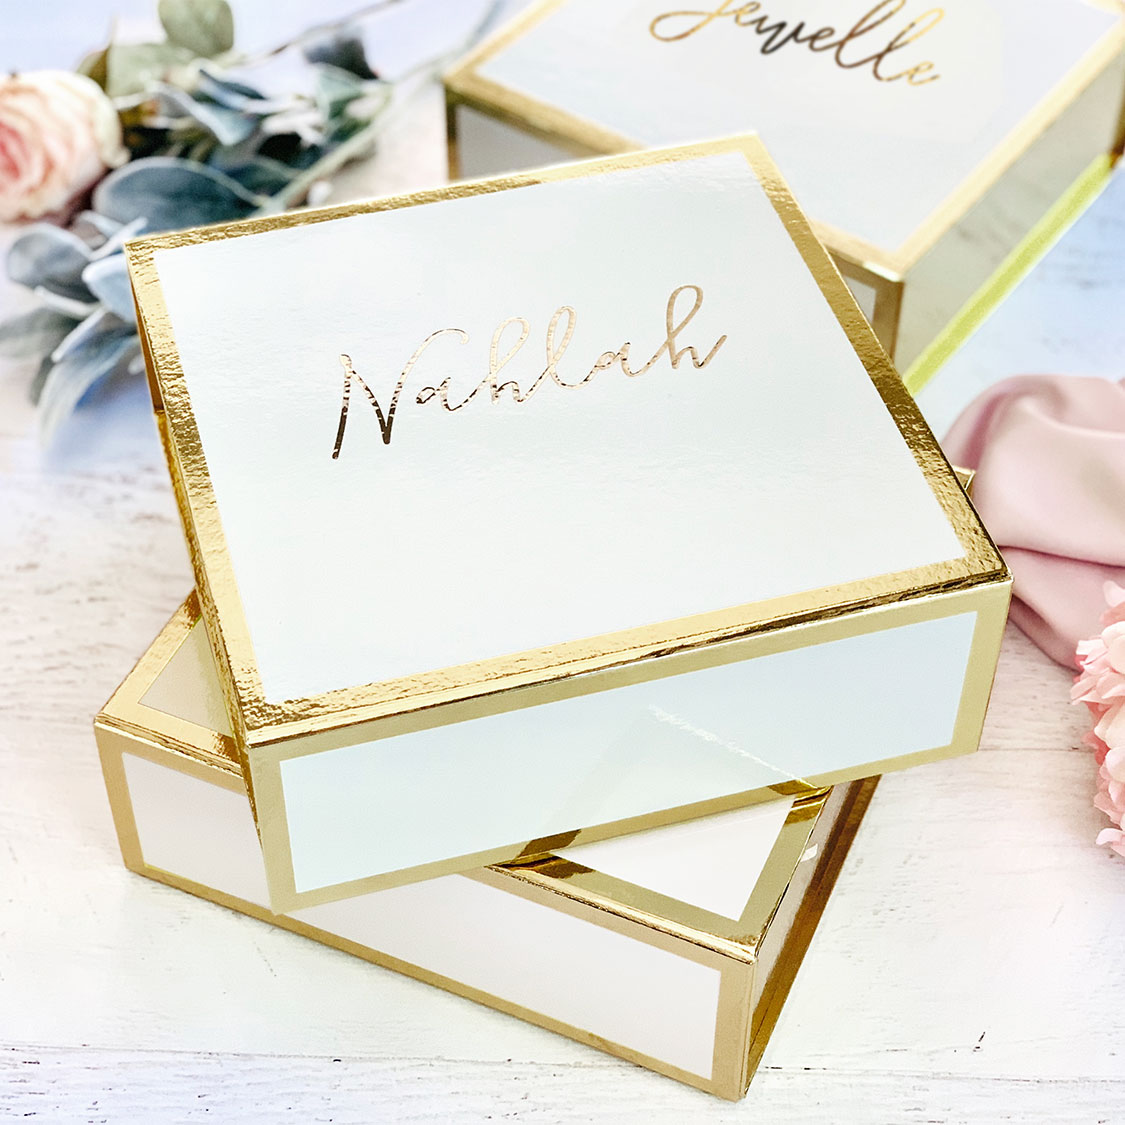 Maid of Honor Proposal Box Personalized Gift Boxes for Matron of